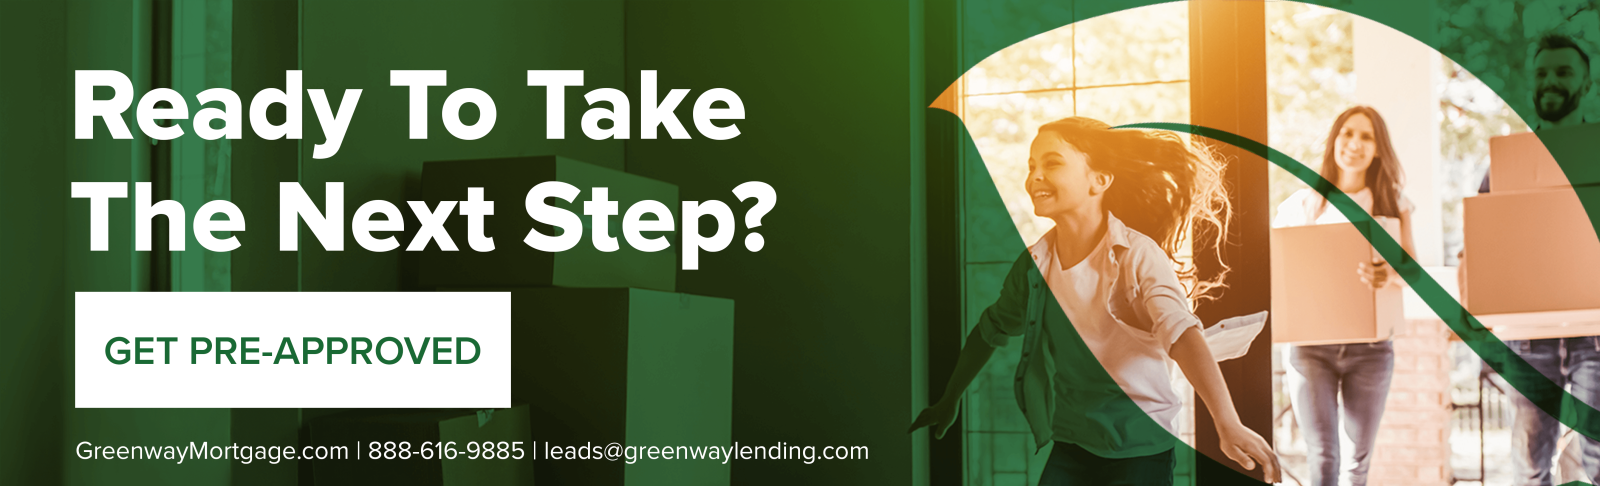 Get Pre-Approved Today - Greenway Mortgage